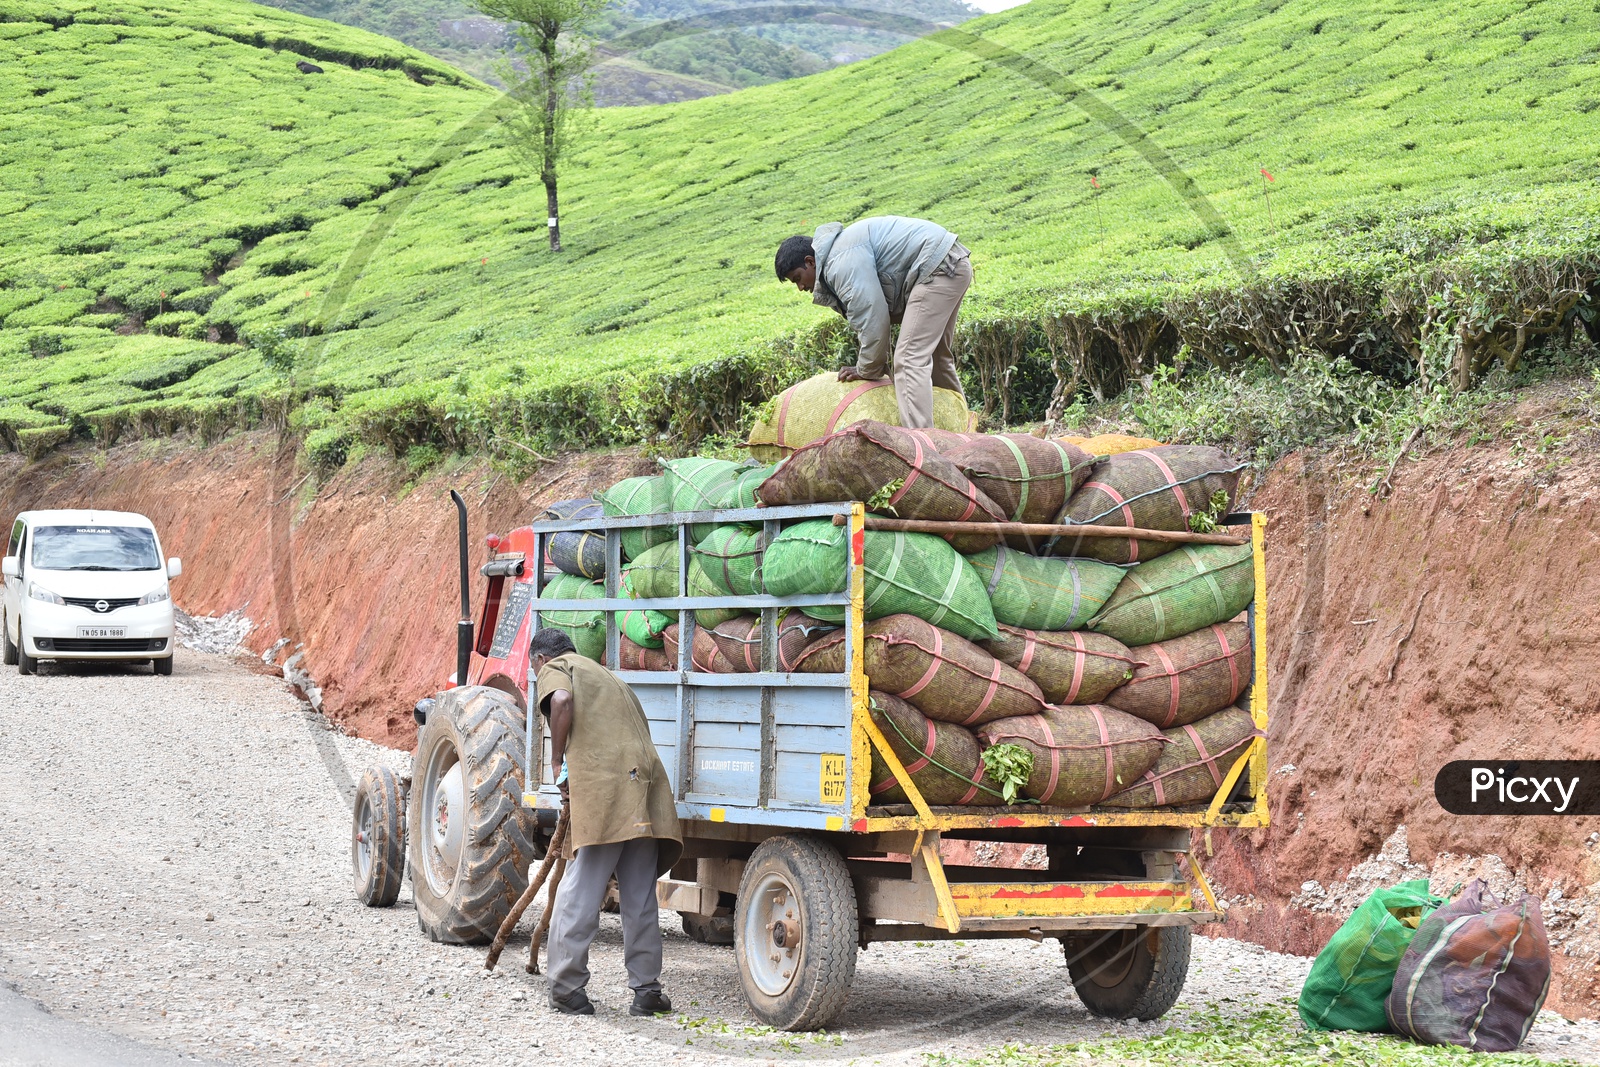 Workers Loading Tea Bags into Tractor